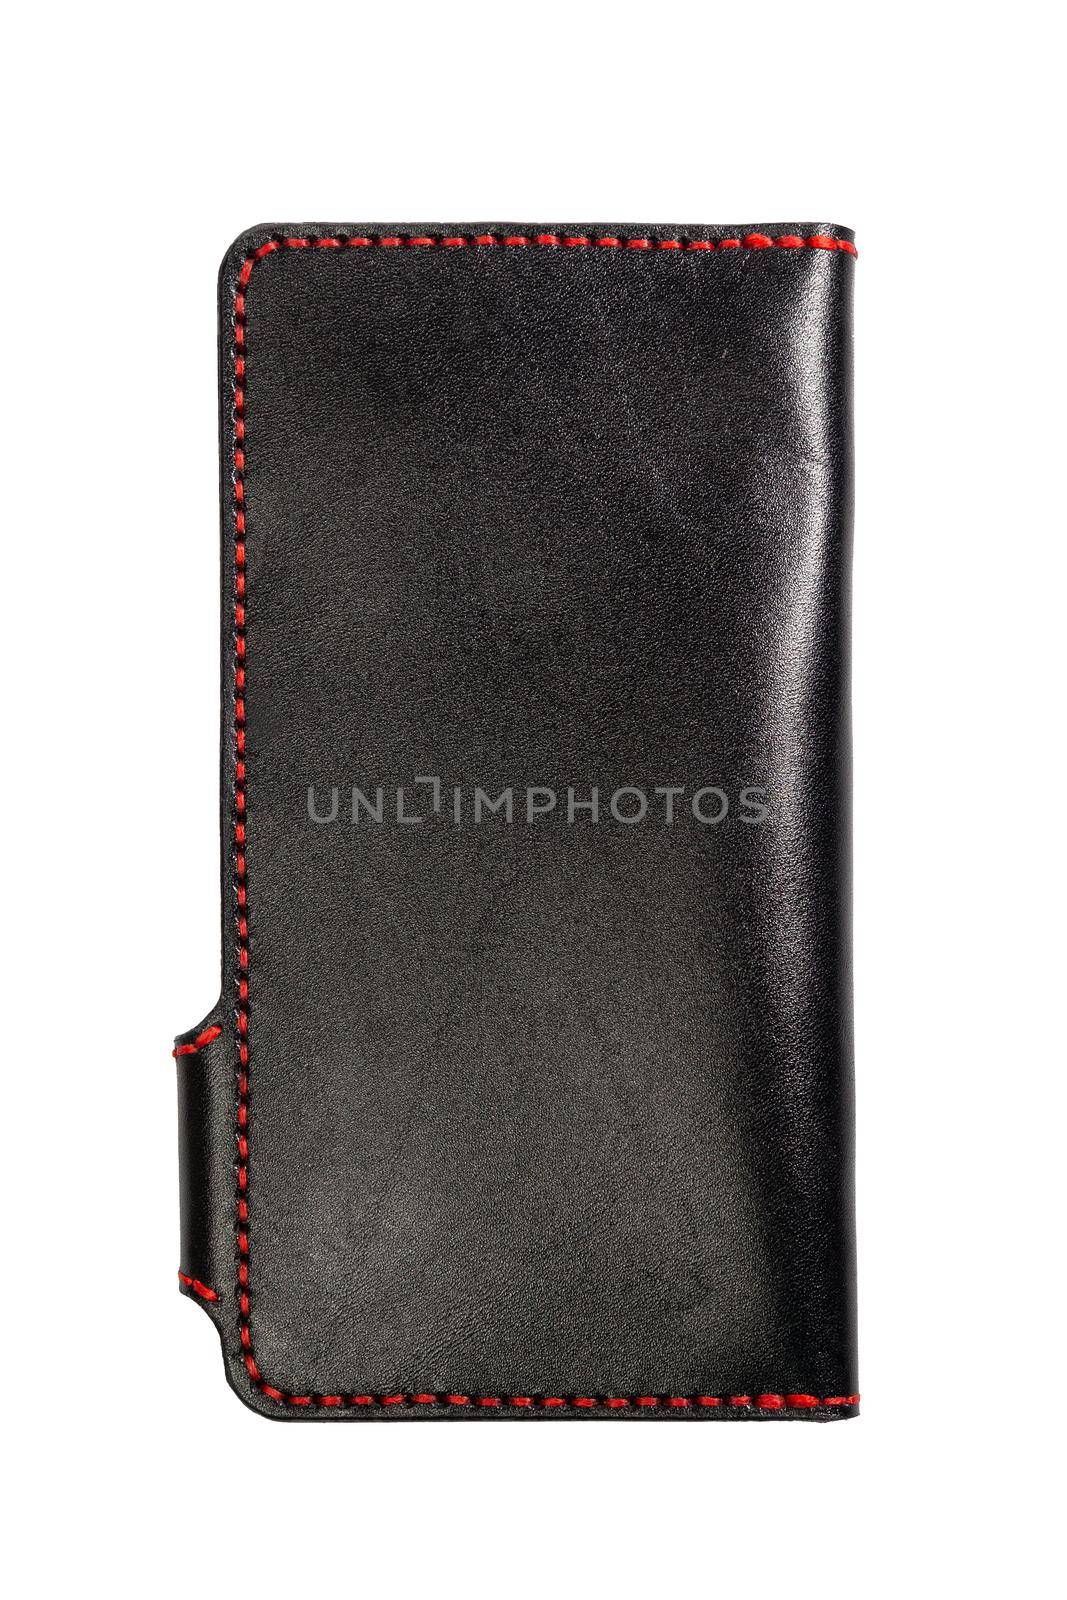 Black natural leather women wallet isolated on white background. Back side.